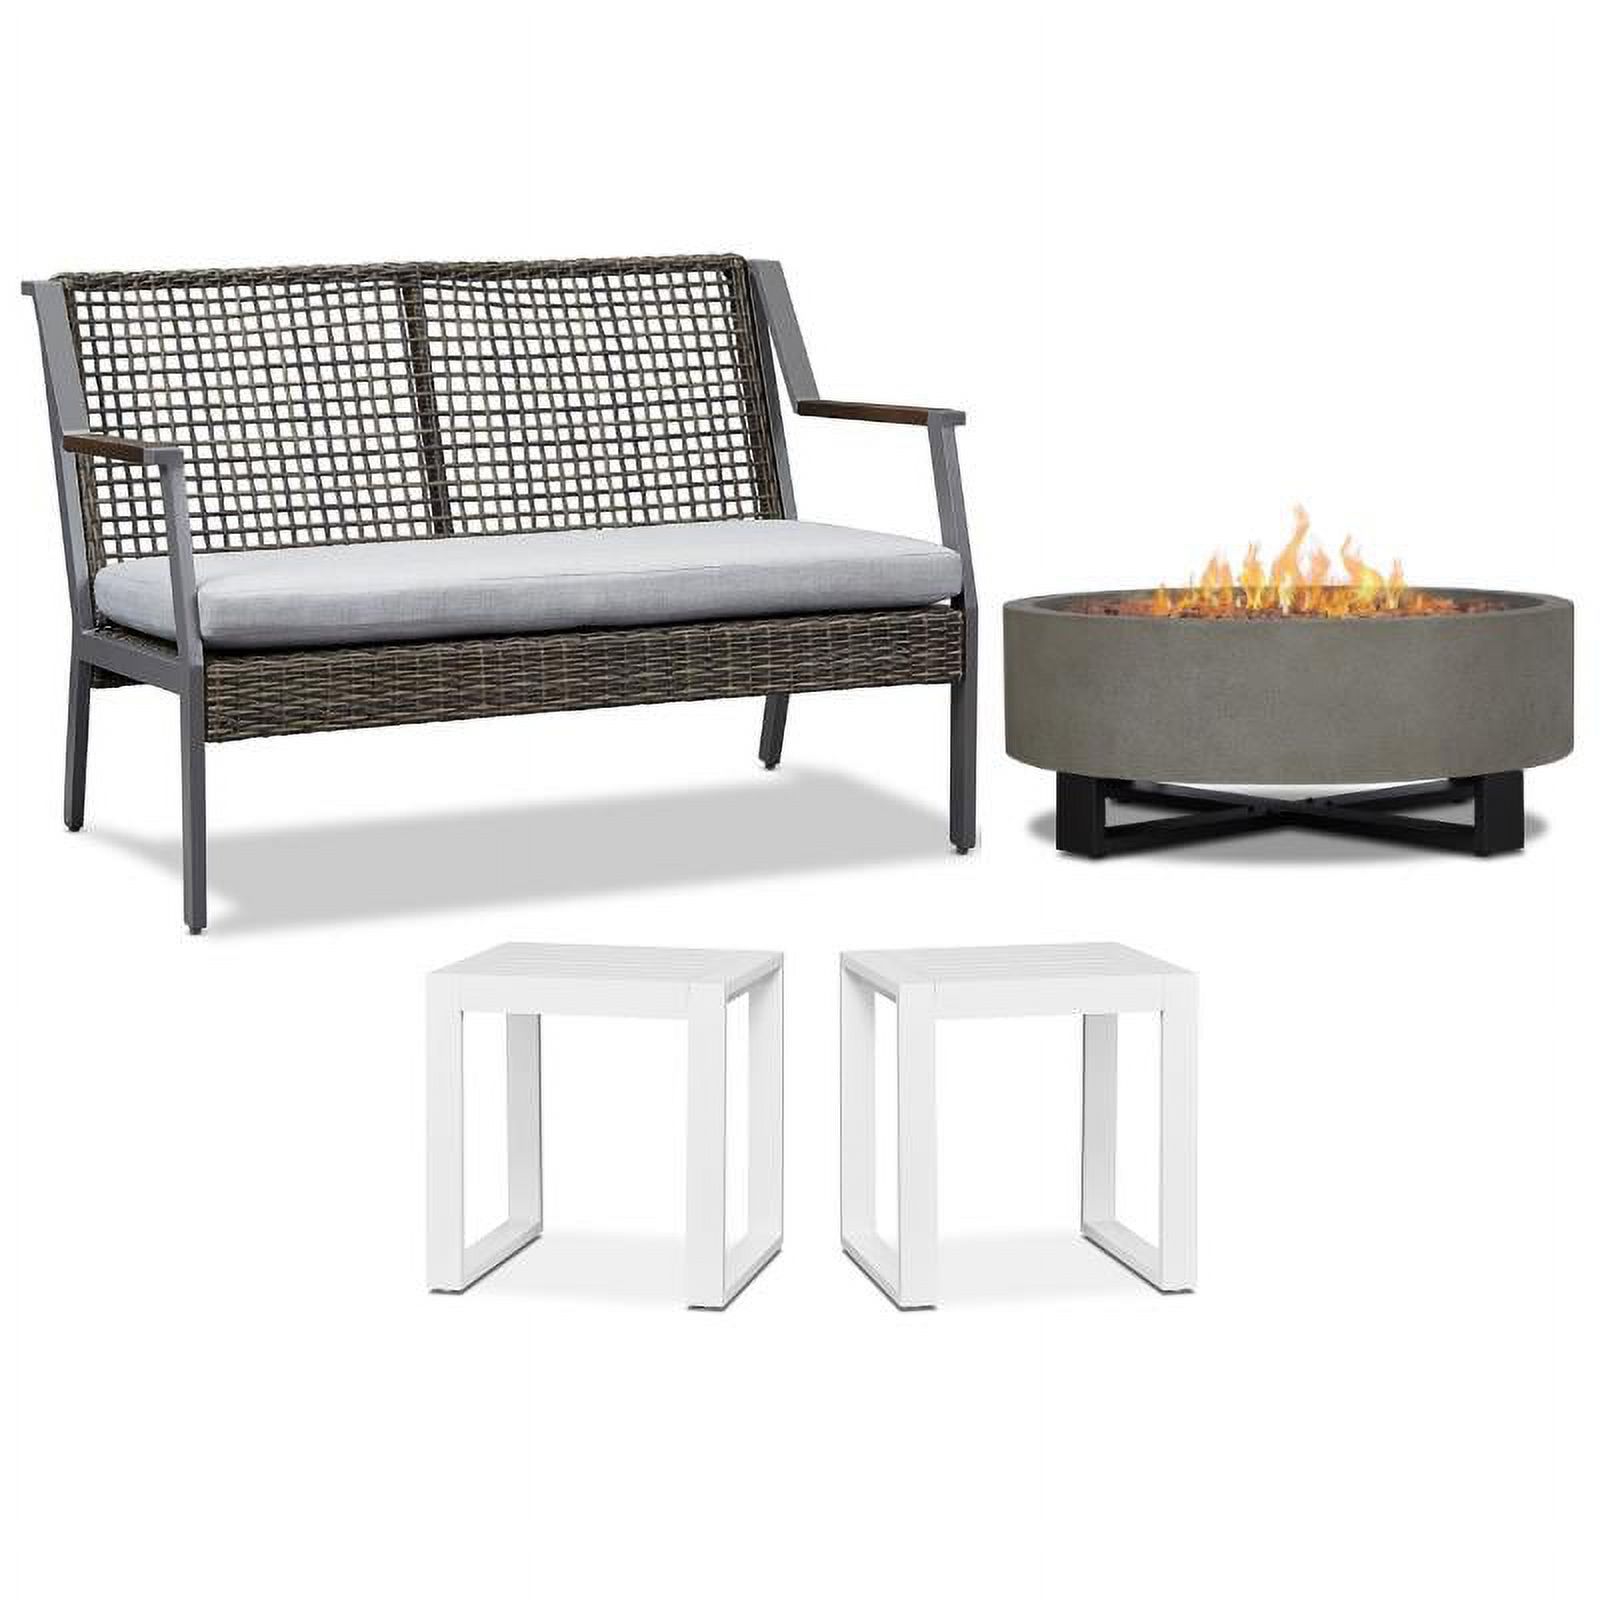 Home Square 4 Piece Set with Fire Bowl for Outdoors Patio Loveseat 2 End Tables - image 1 of 17